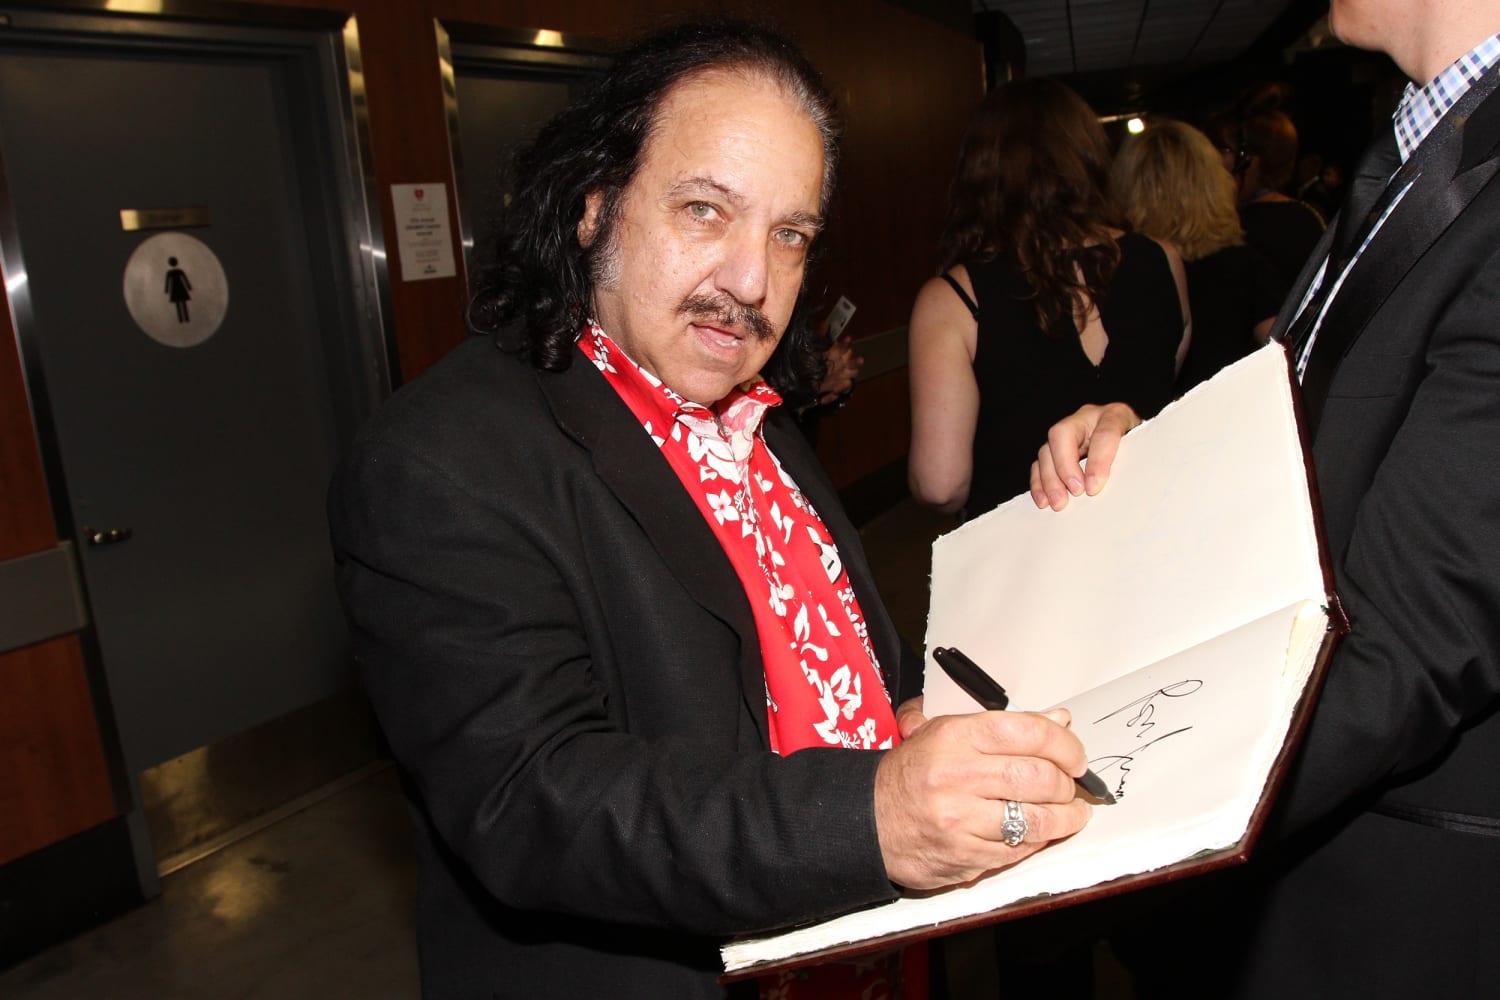 Xx Nxx Rape Vedeo - Porn actor Ron Jeremy charged with rape, sexual assault